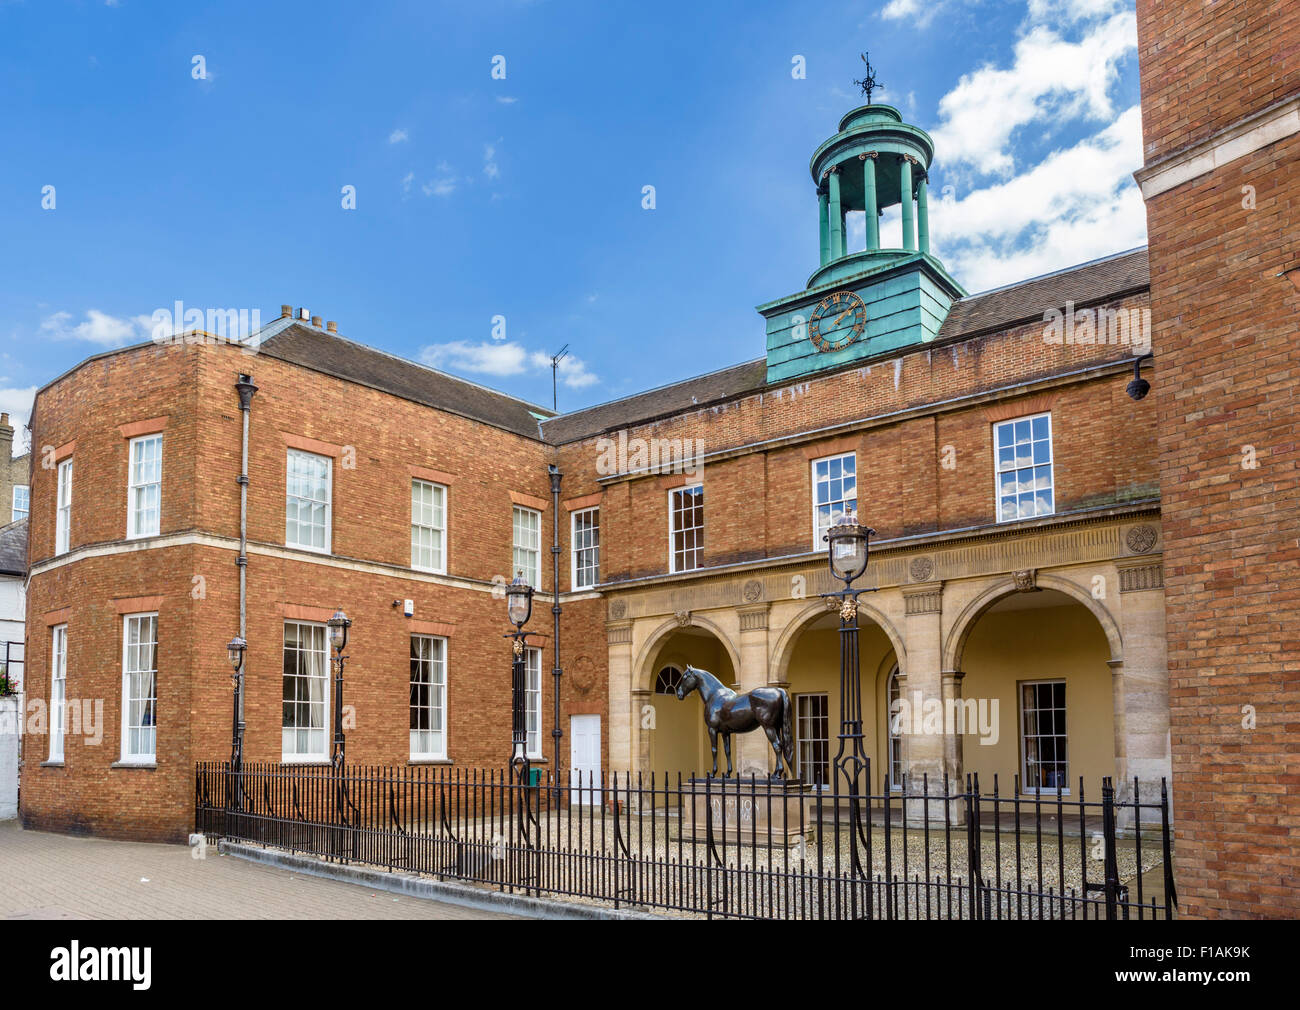 The Jockey Club Rooms, a private members club, High Street, Newmarket, Suffolk, England, UK Stock Photo